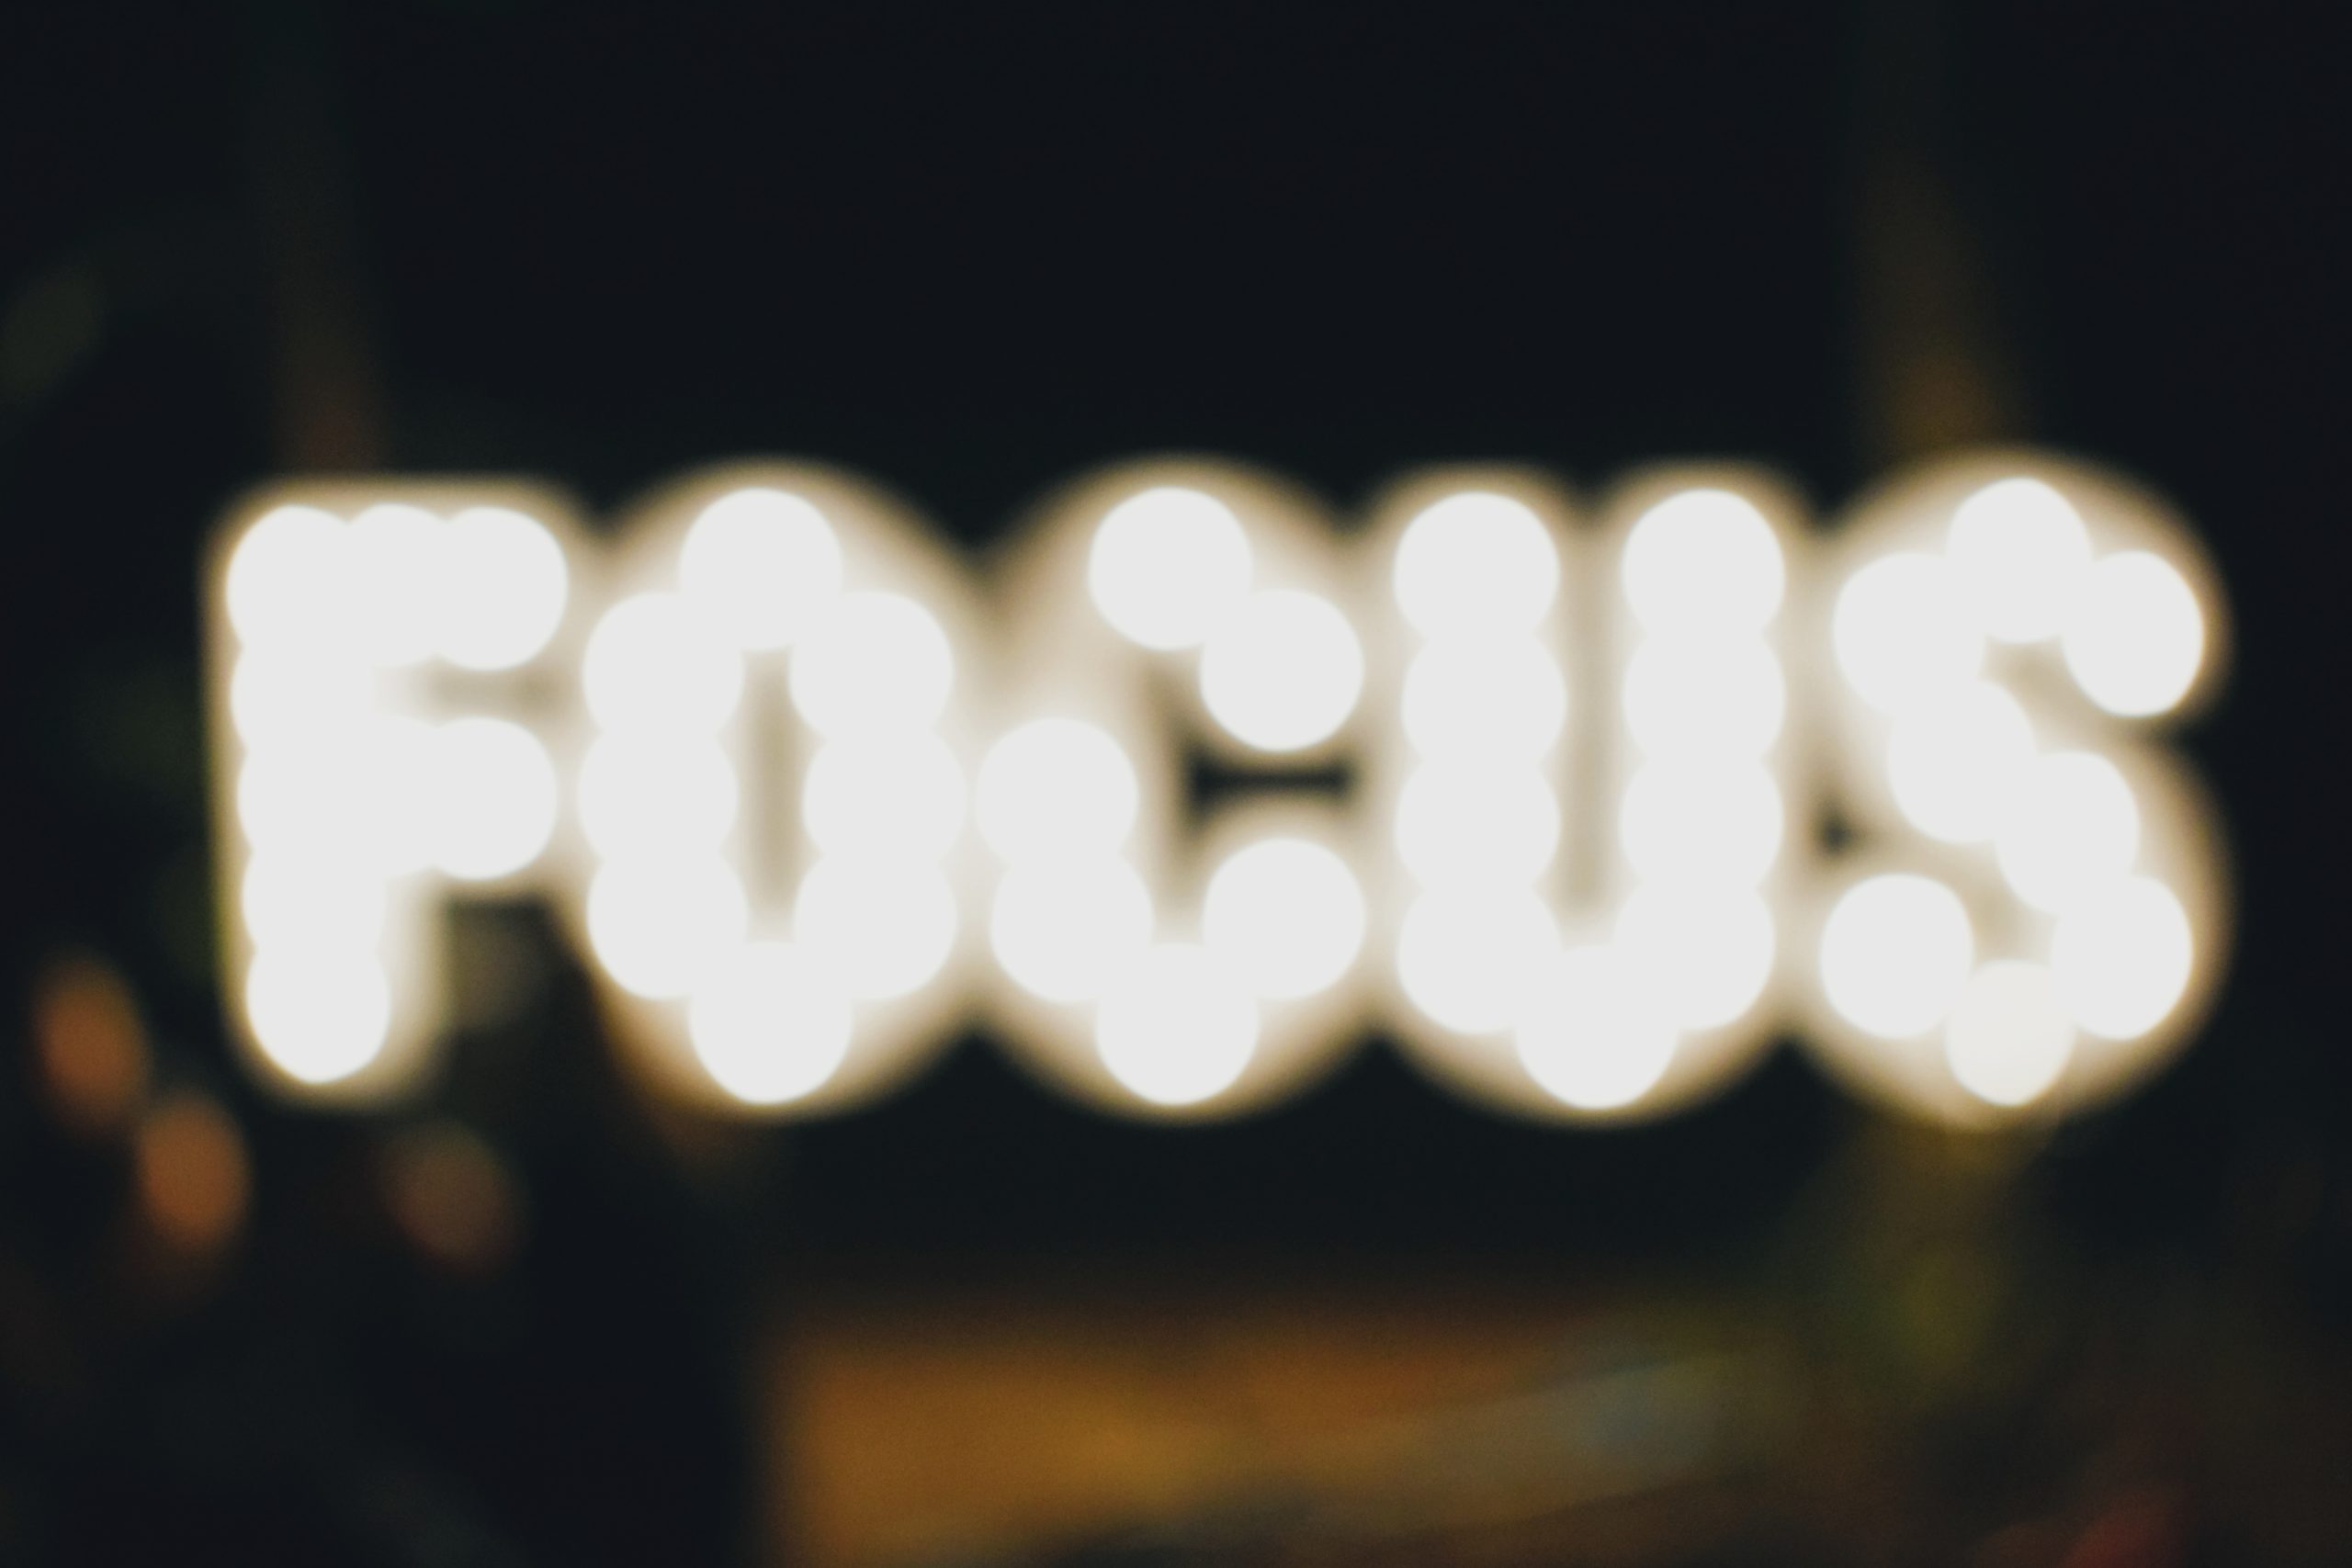 Tips for when your focus is fuzzy